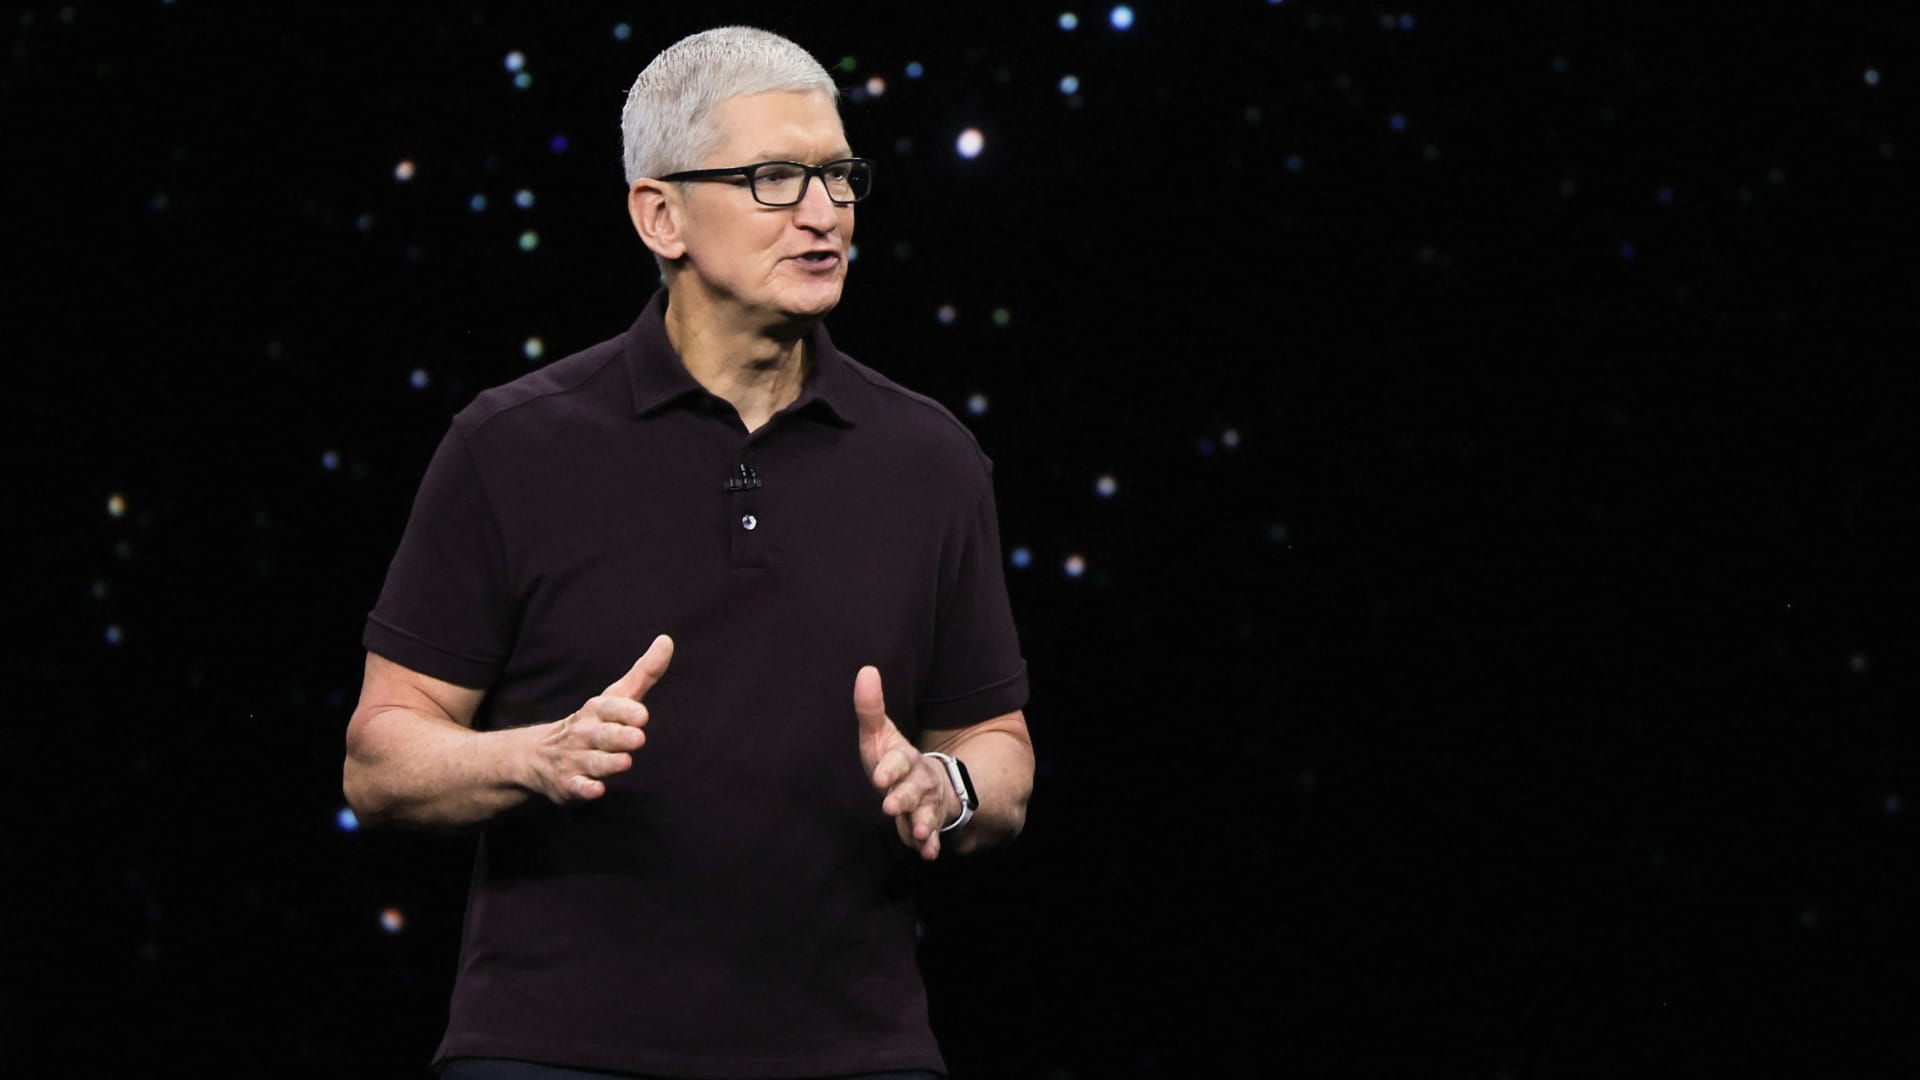 Apple CEO Tim Cook doesn’t like metaverse, prefers augmented reality